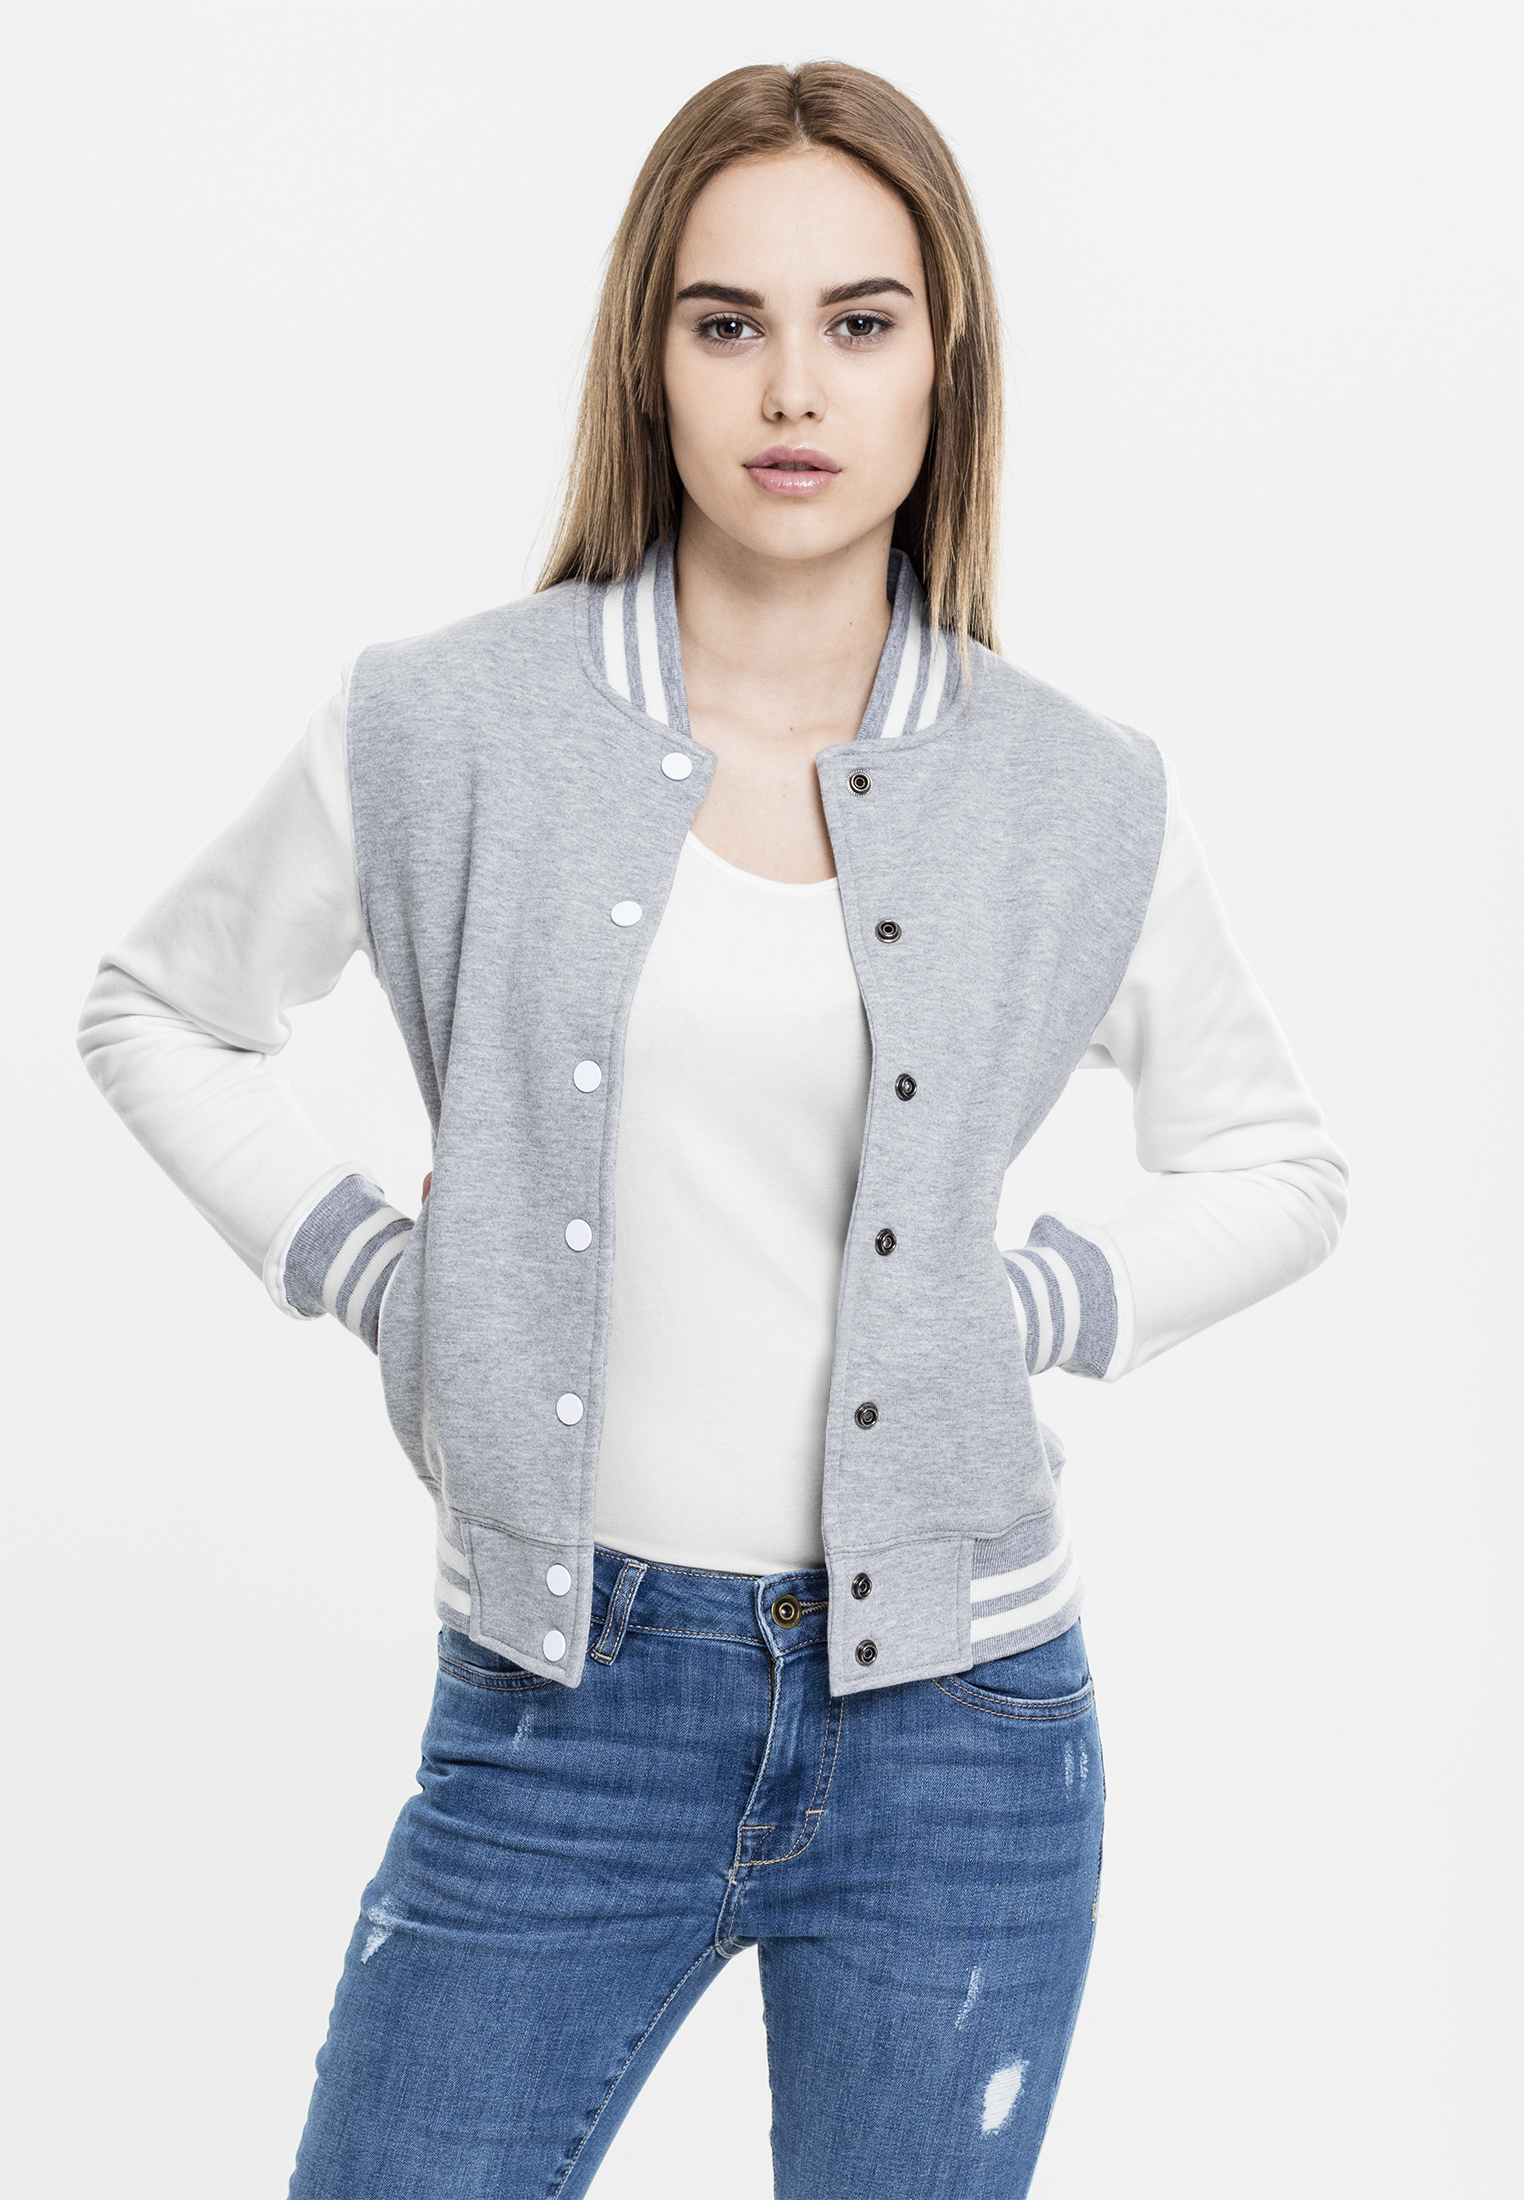 College Jacken Ladies 2-tone College Sweatjacket in Farbe gry/wht